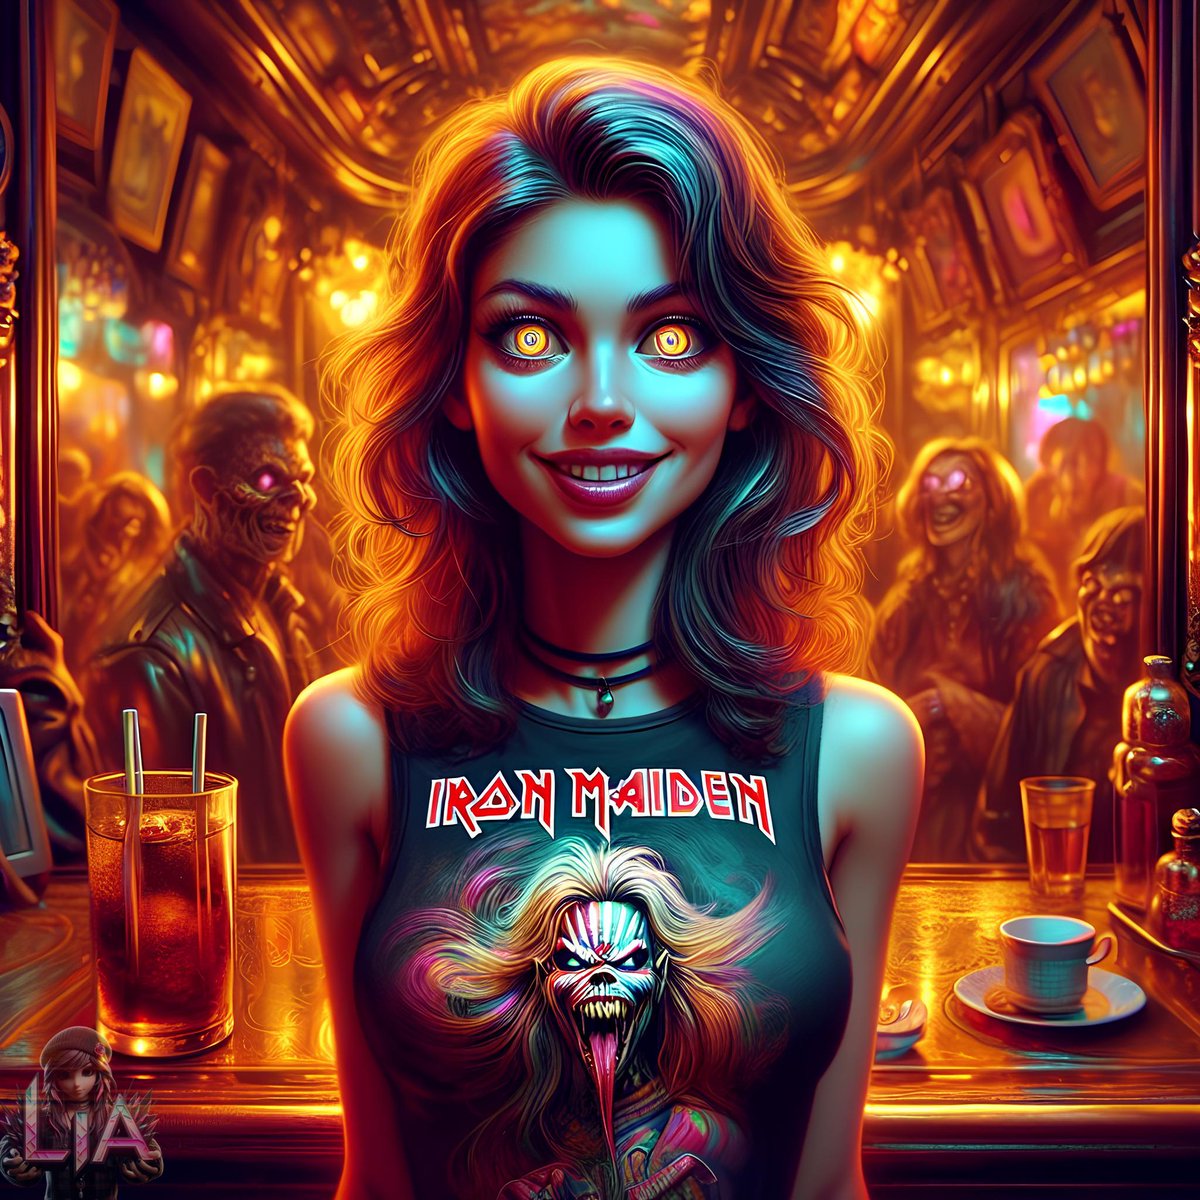 😈Lia😈Iron Maiden😈
#AI #aiart #AIArtwork #AIgenerated #aiart #AIArtistCommunity #aiimages #aicreator🖤😈🖤